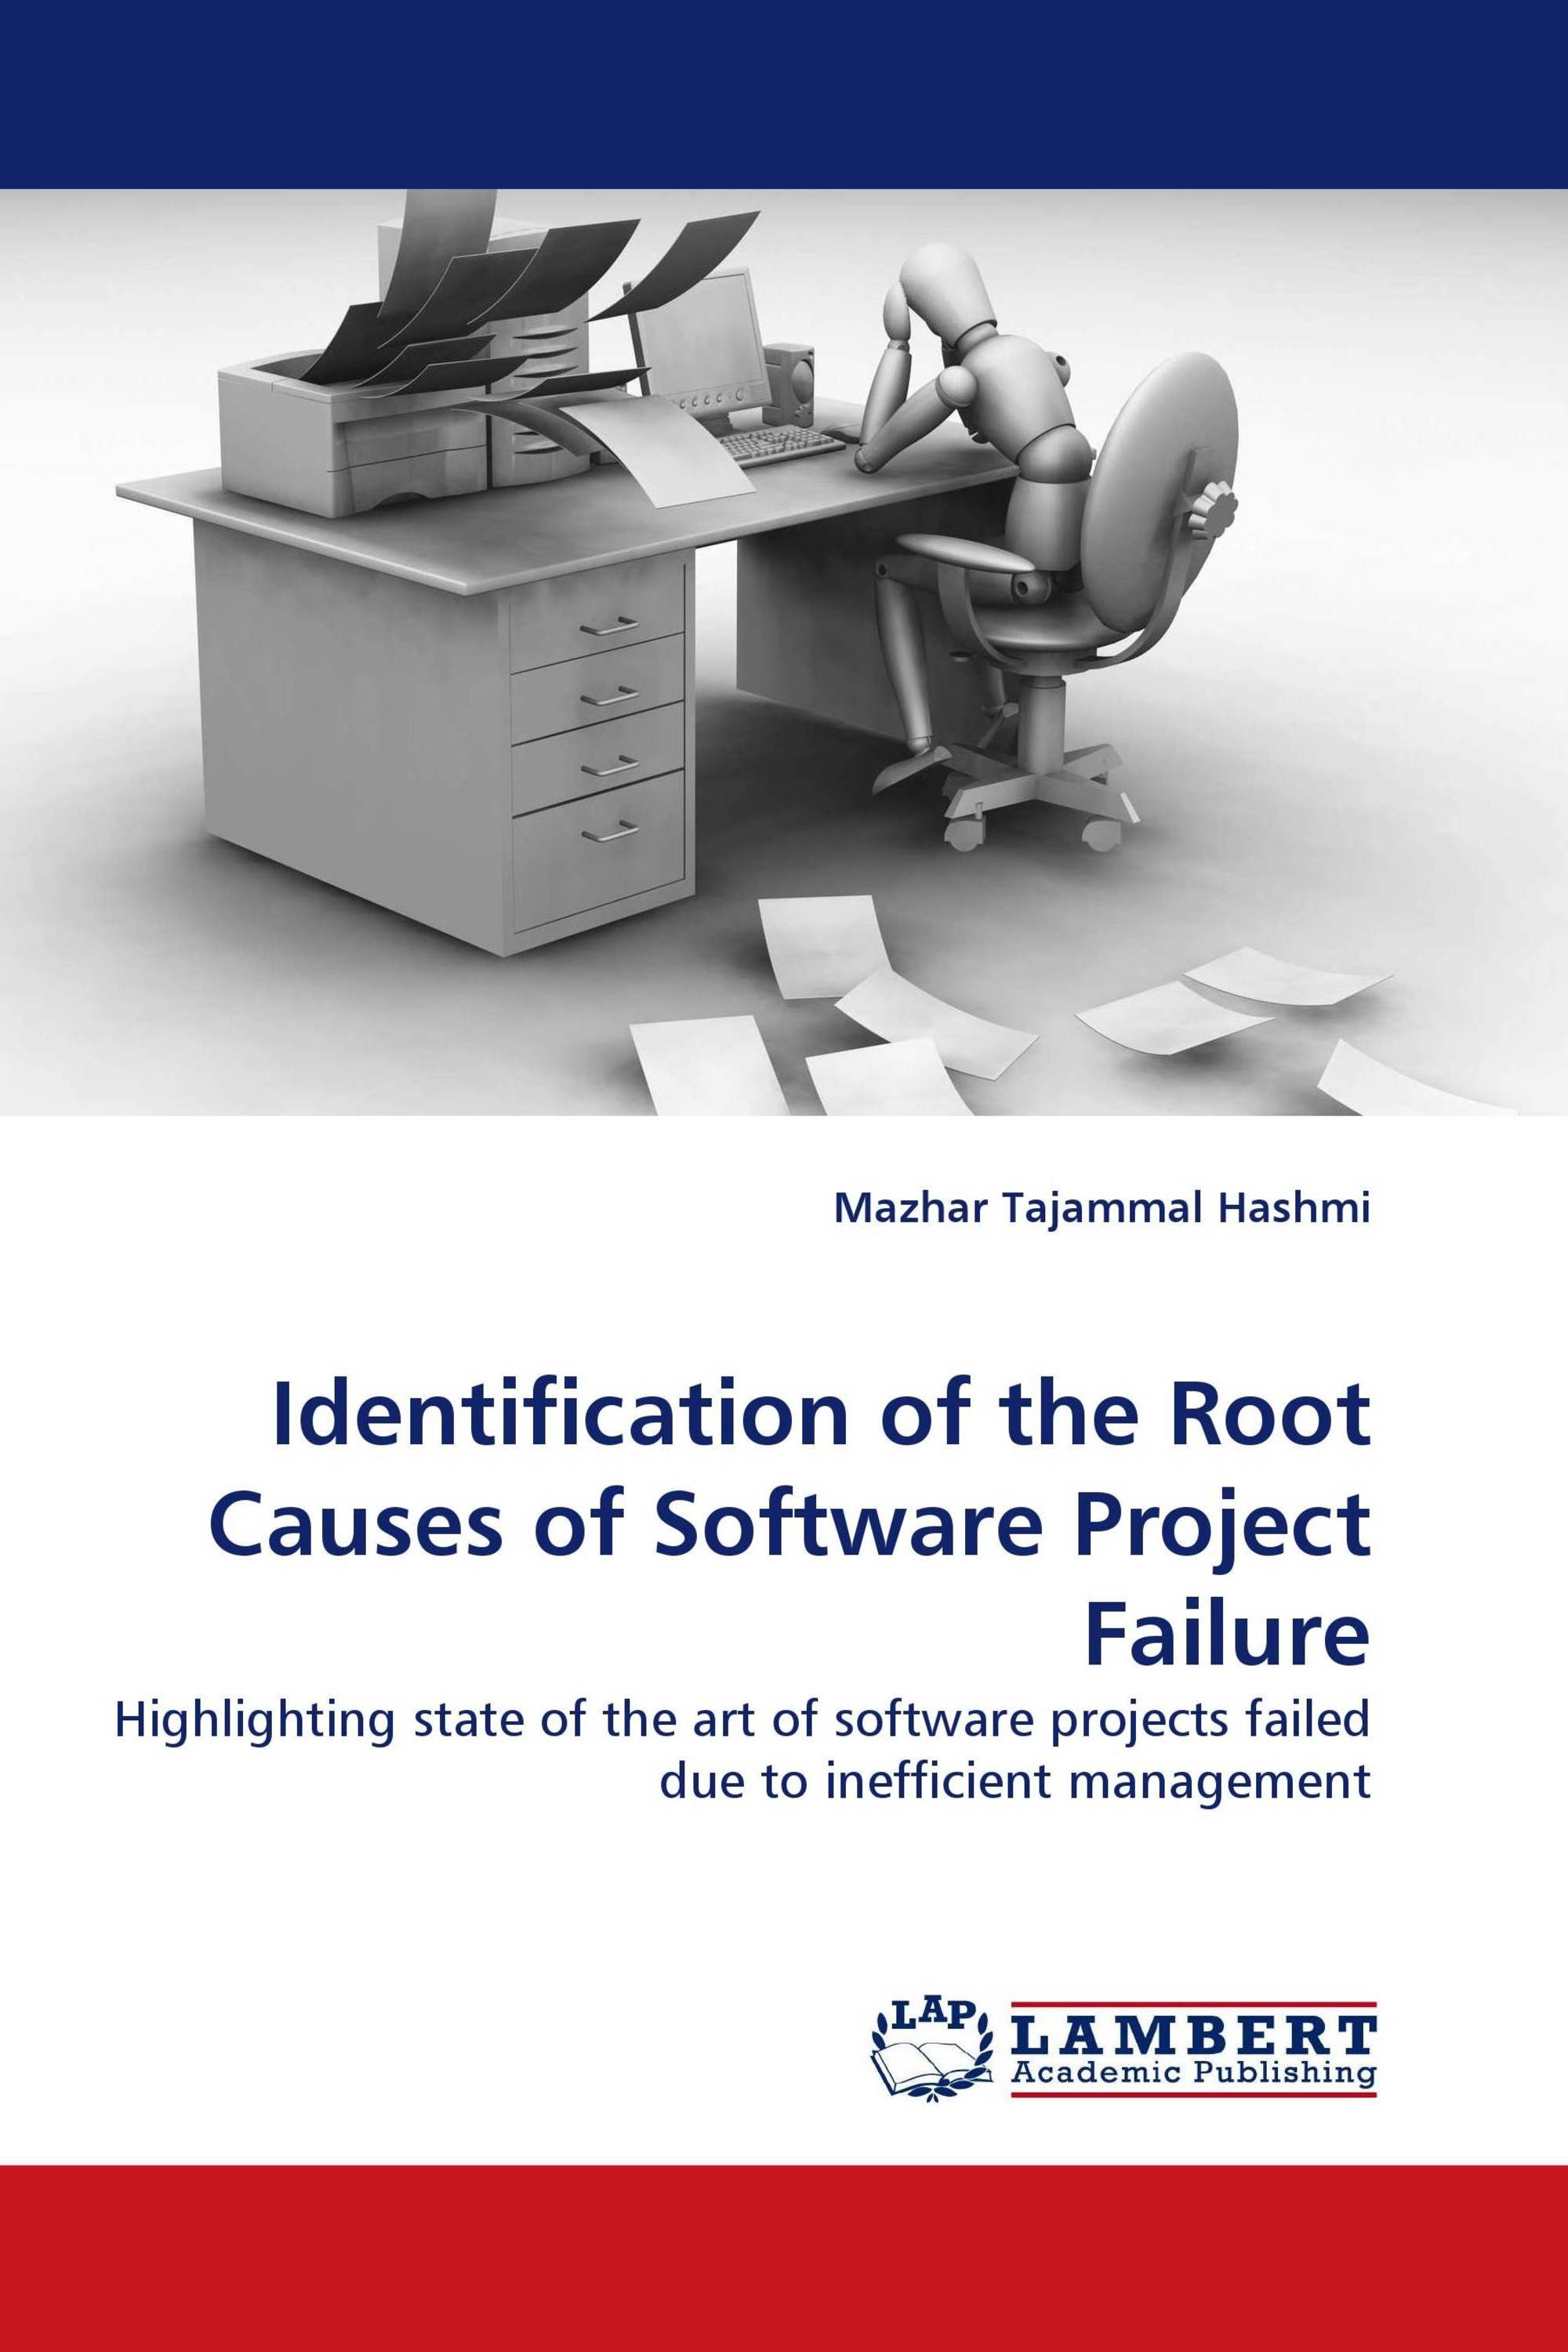 software project failure case study